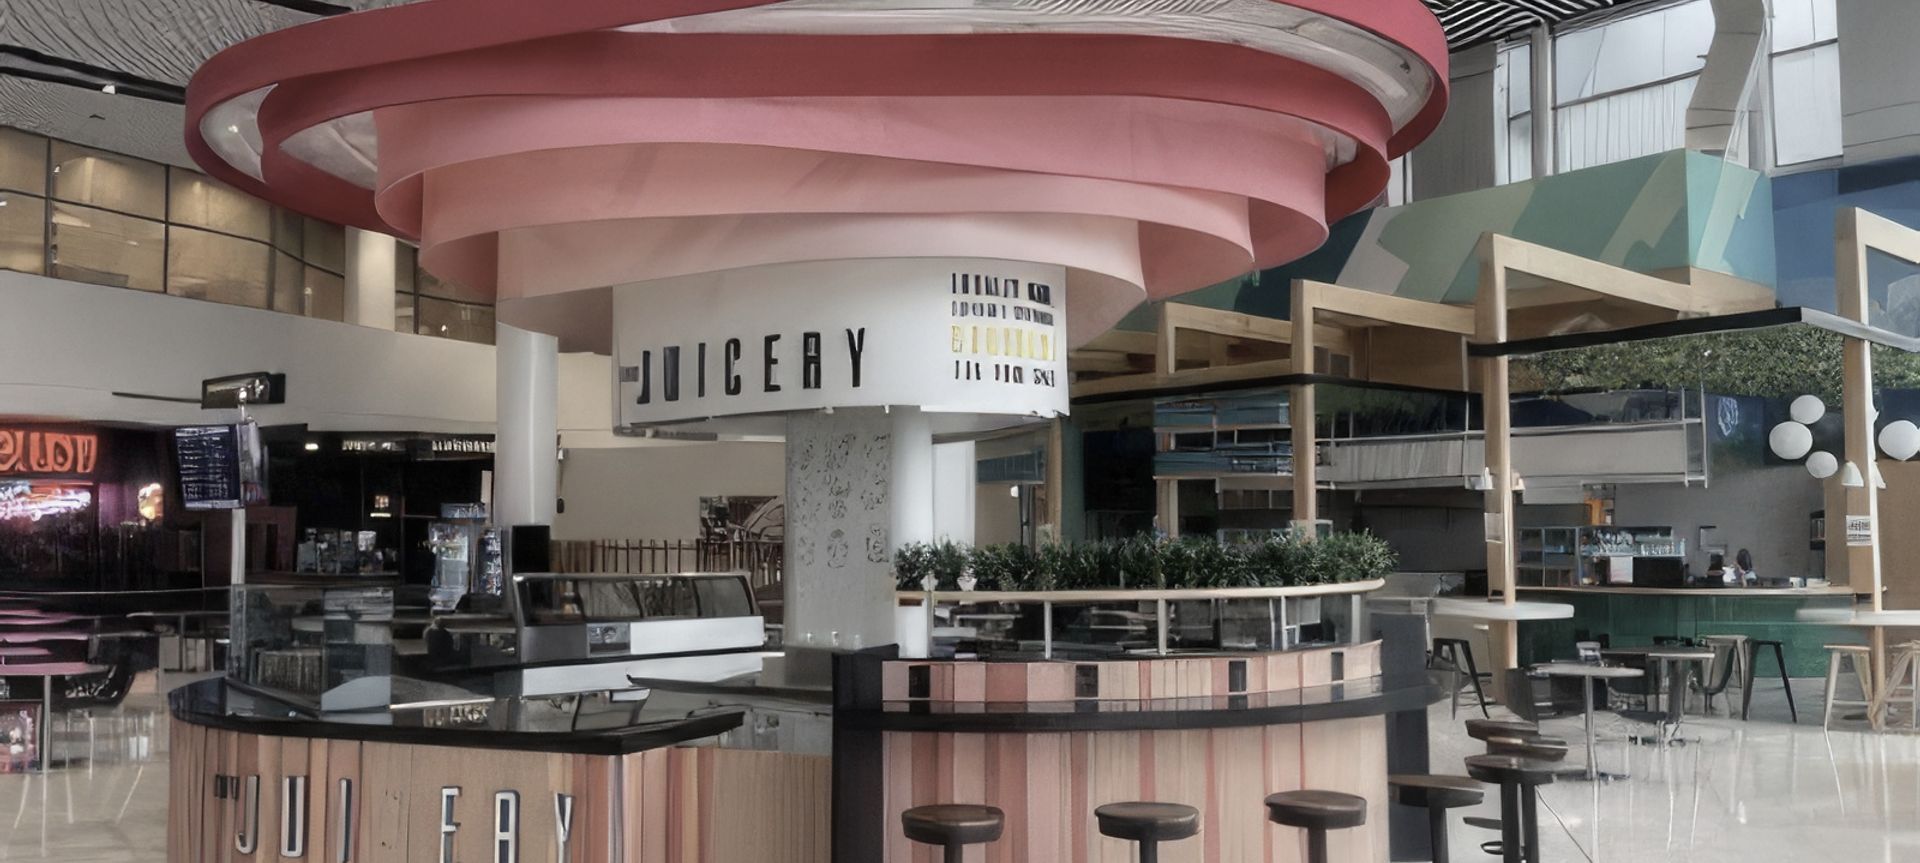 The Juicery banner